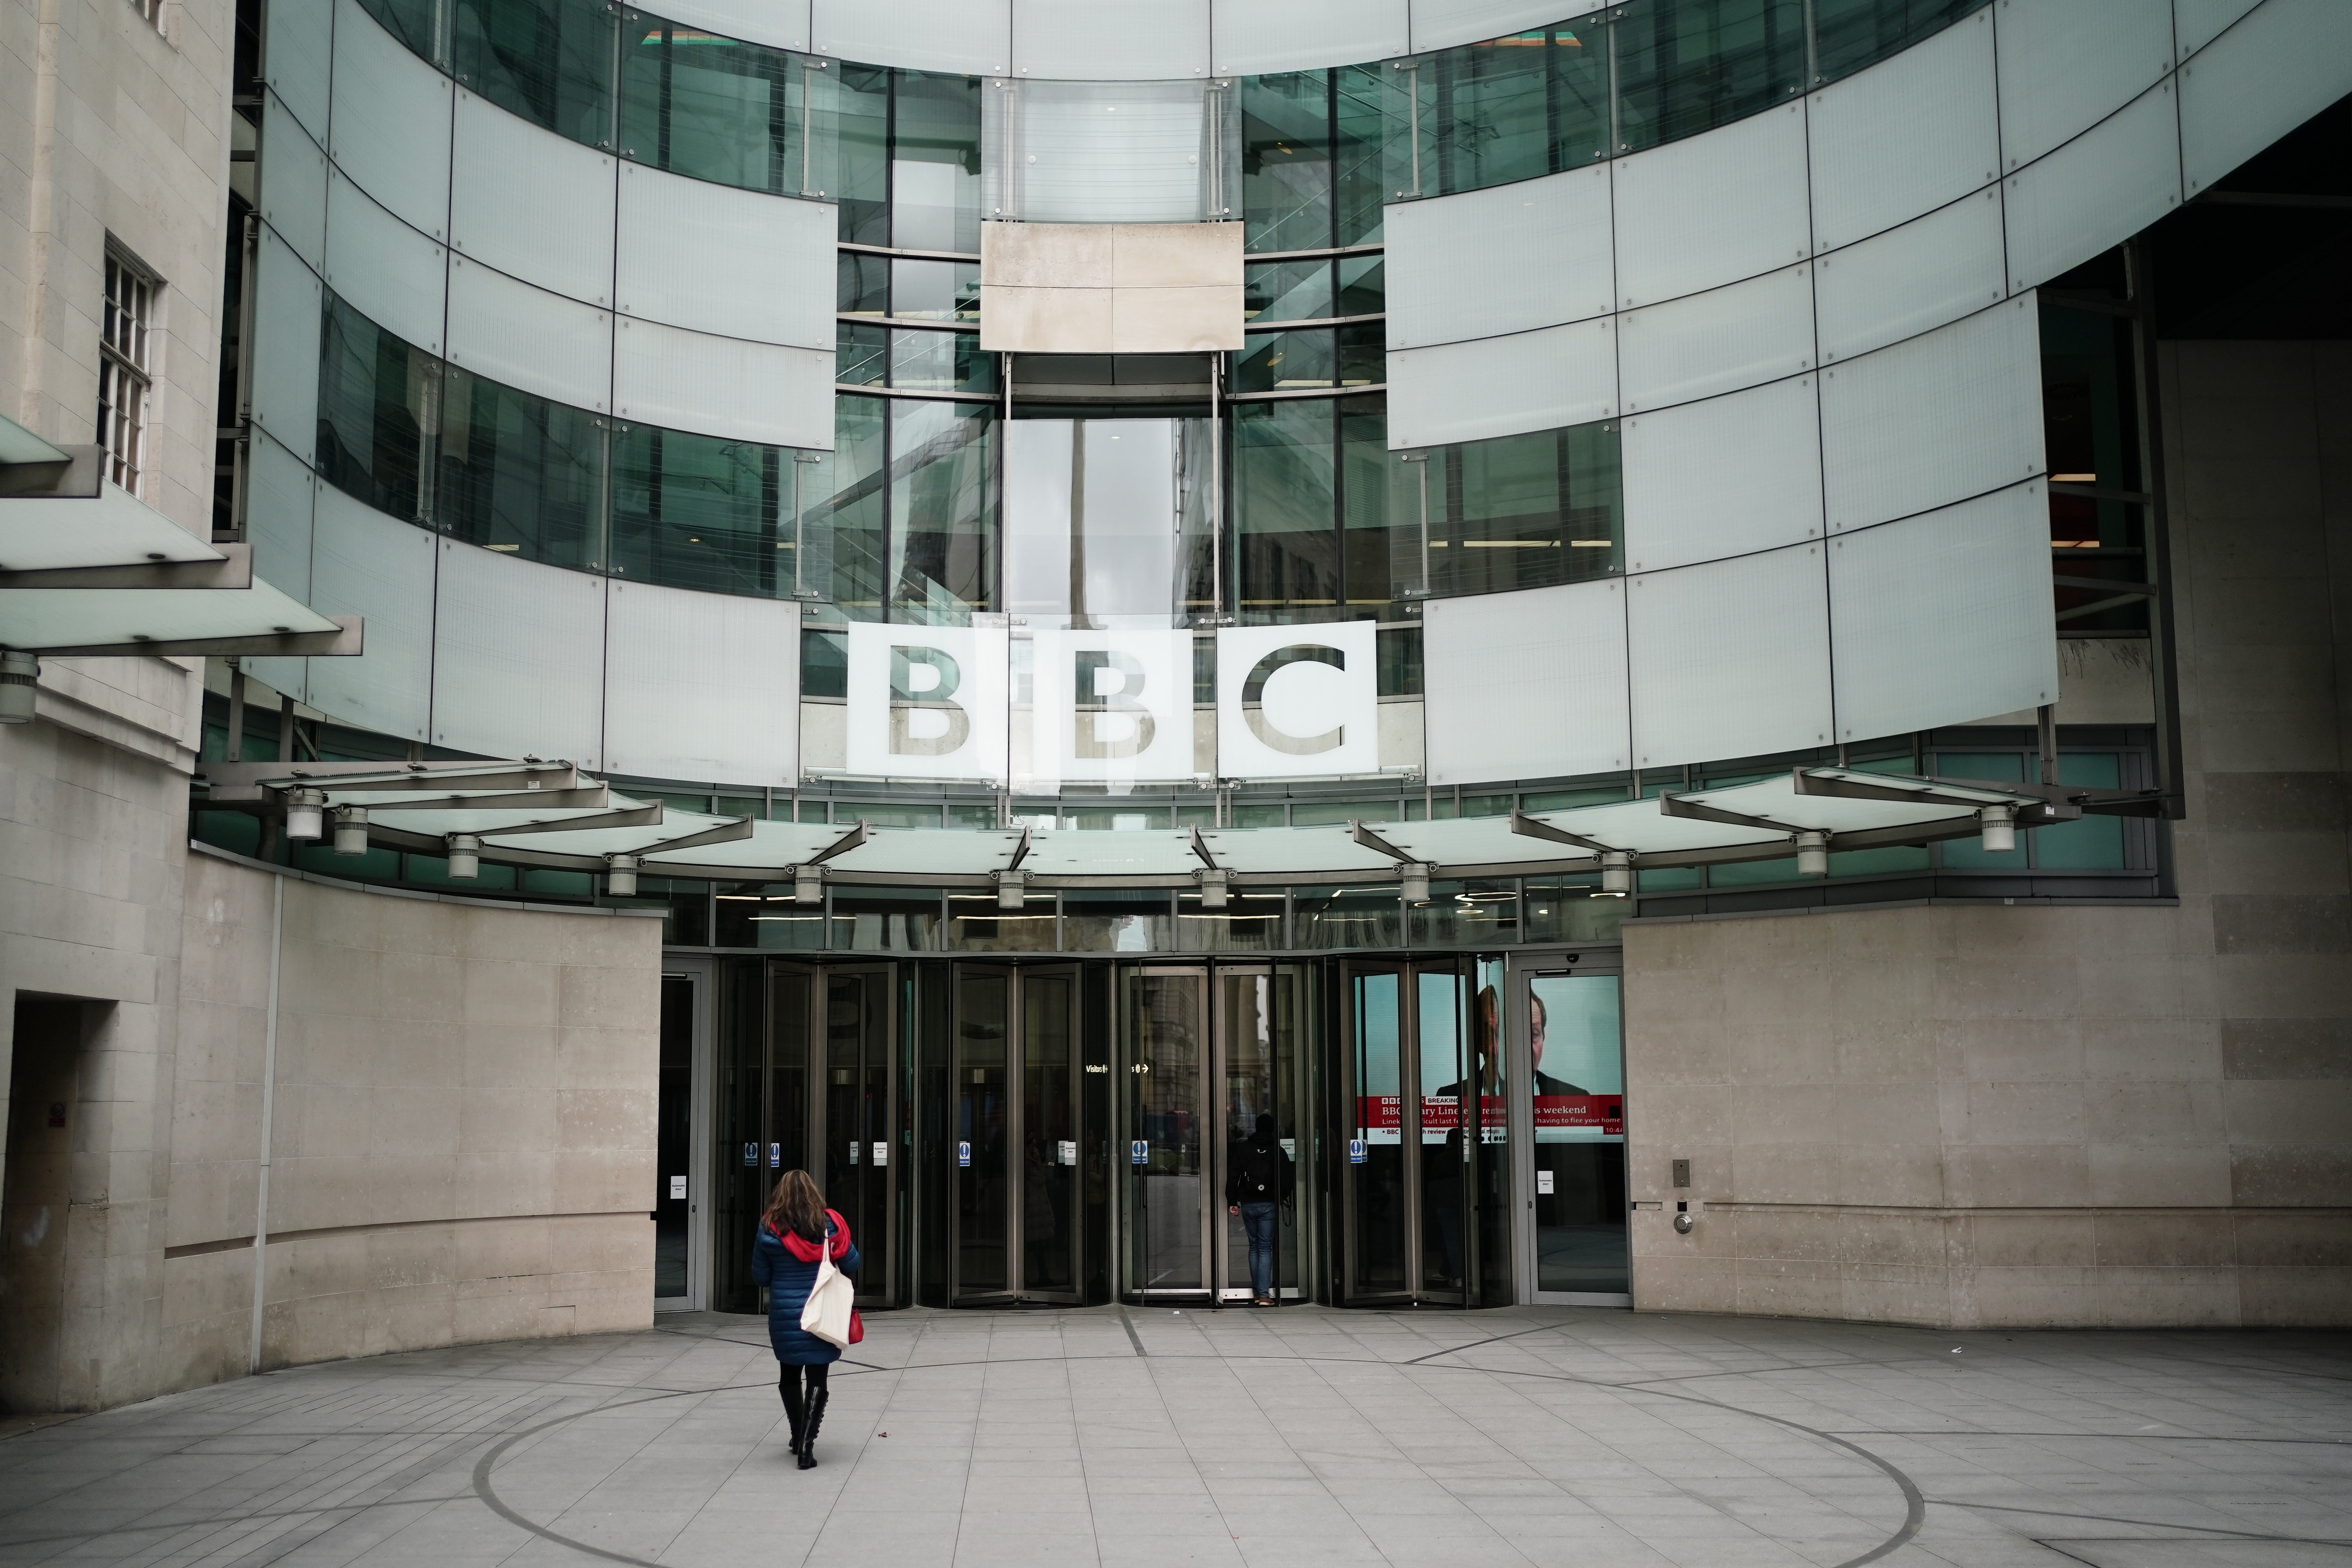 Has the time come for the BBC to eschew all ties with the government and step into the broadcasting marketplace?